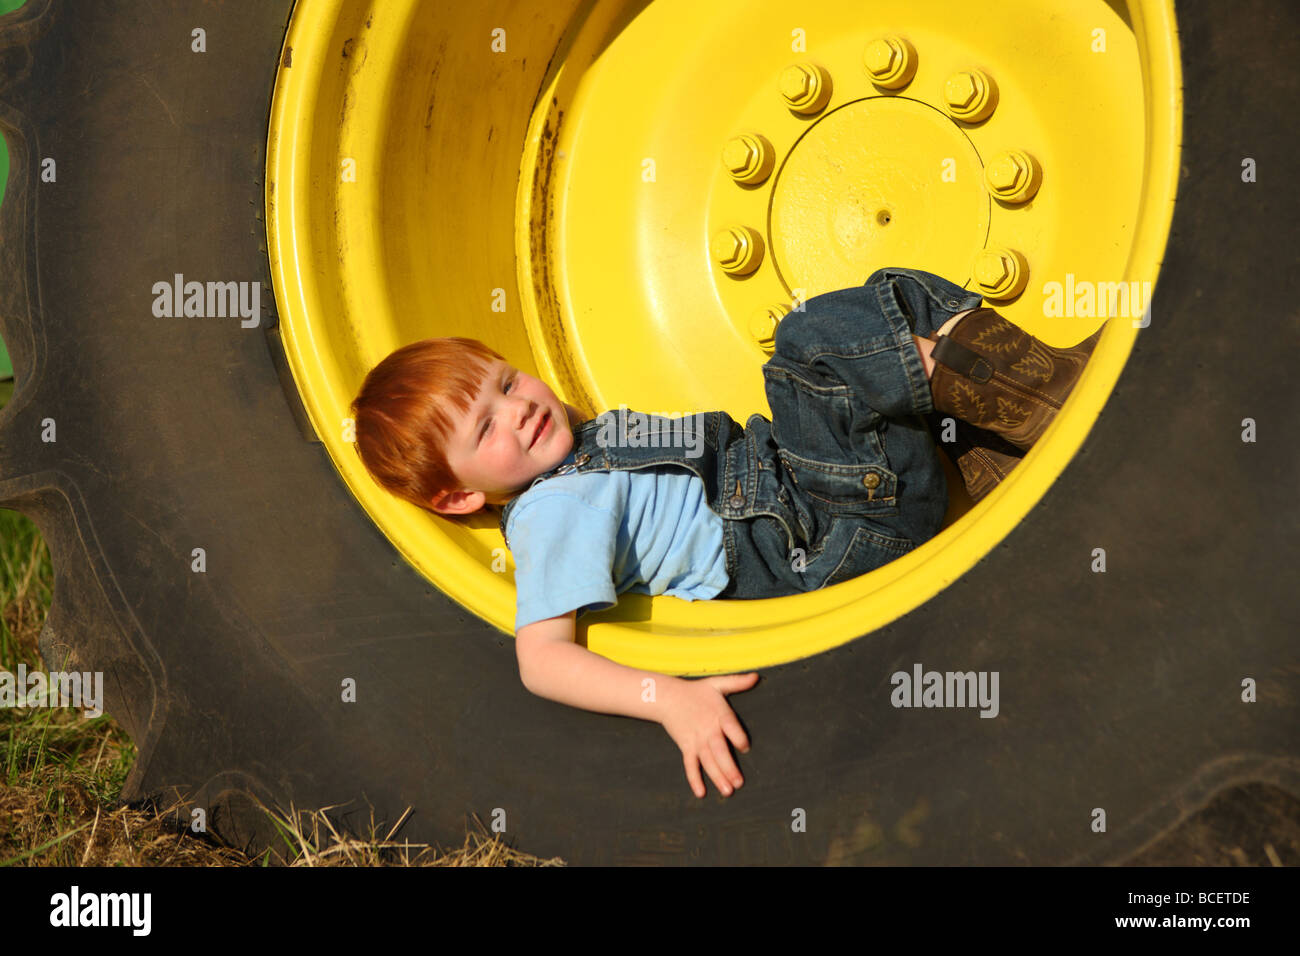 Young boy laying in large tractor wheel Stock Photo